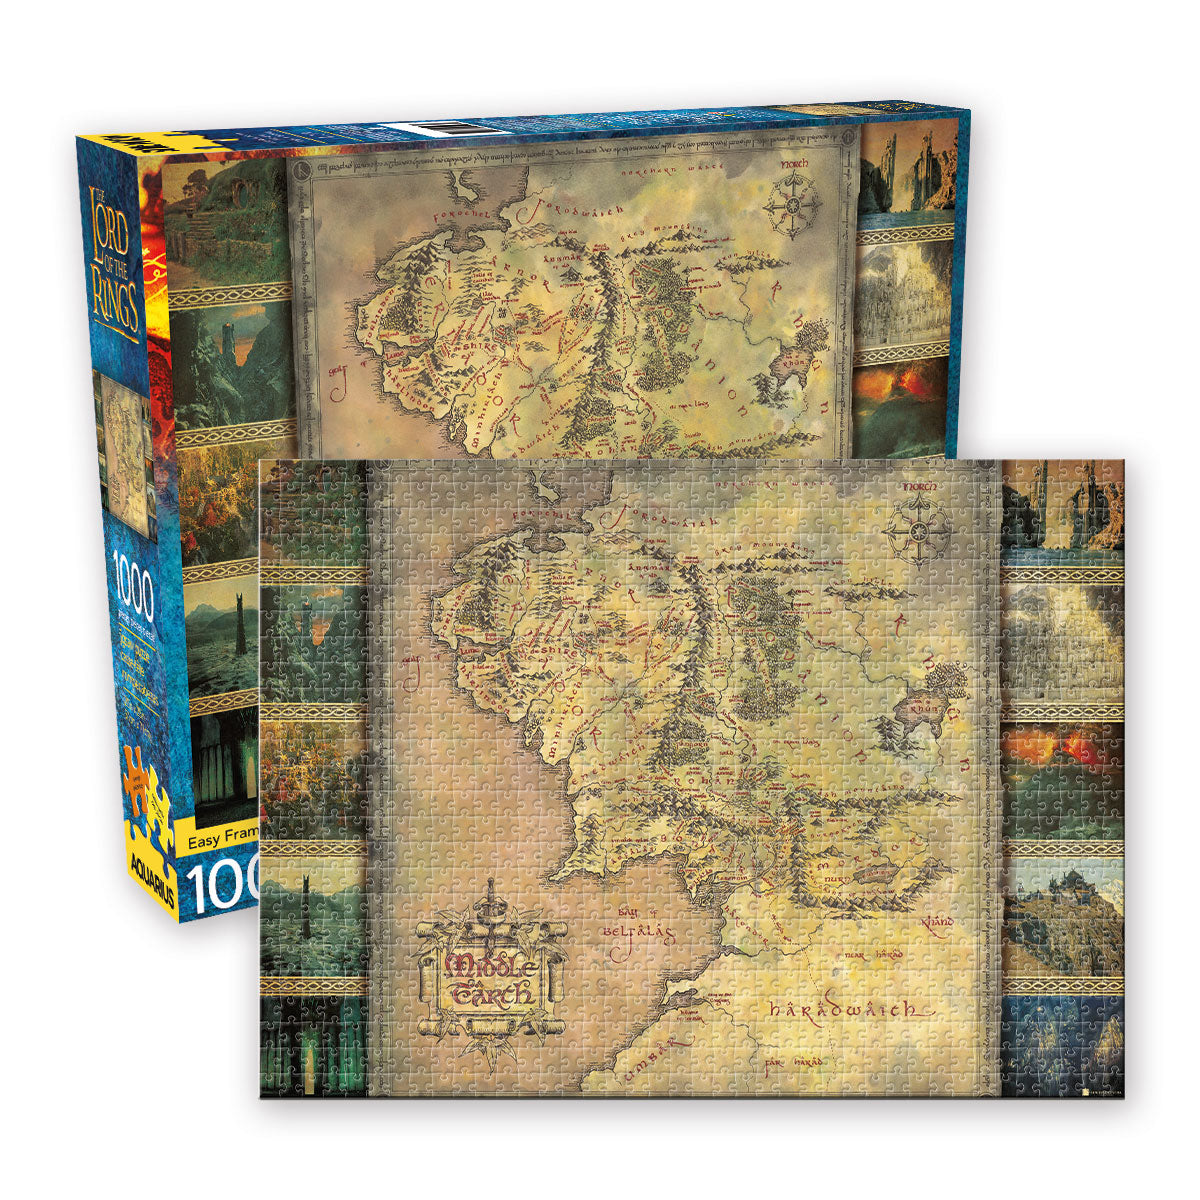 Lord of the Rings Map - 1000pc Jigsaw